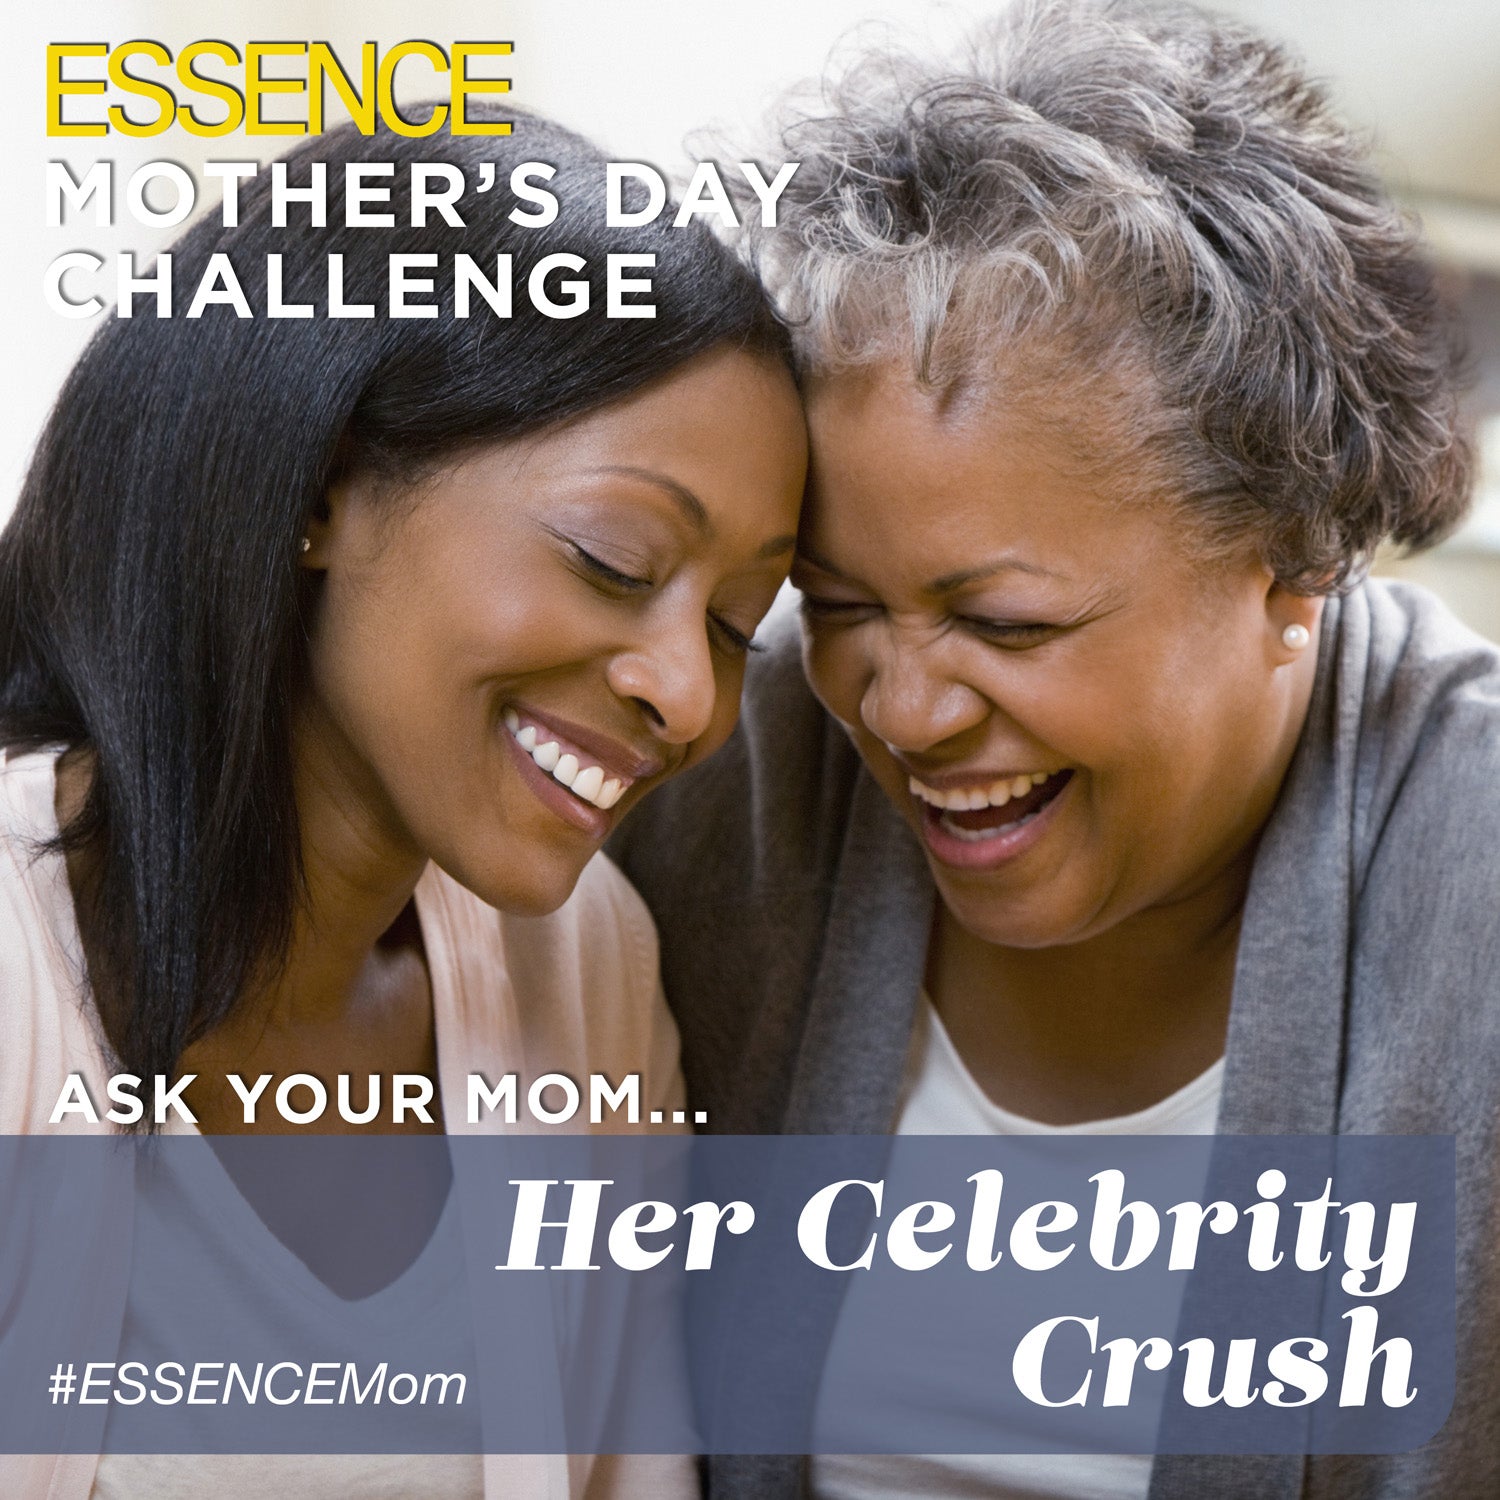 ESSENCE's Mother's Day Challenge